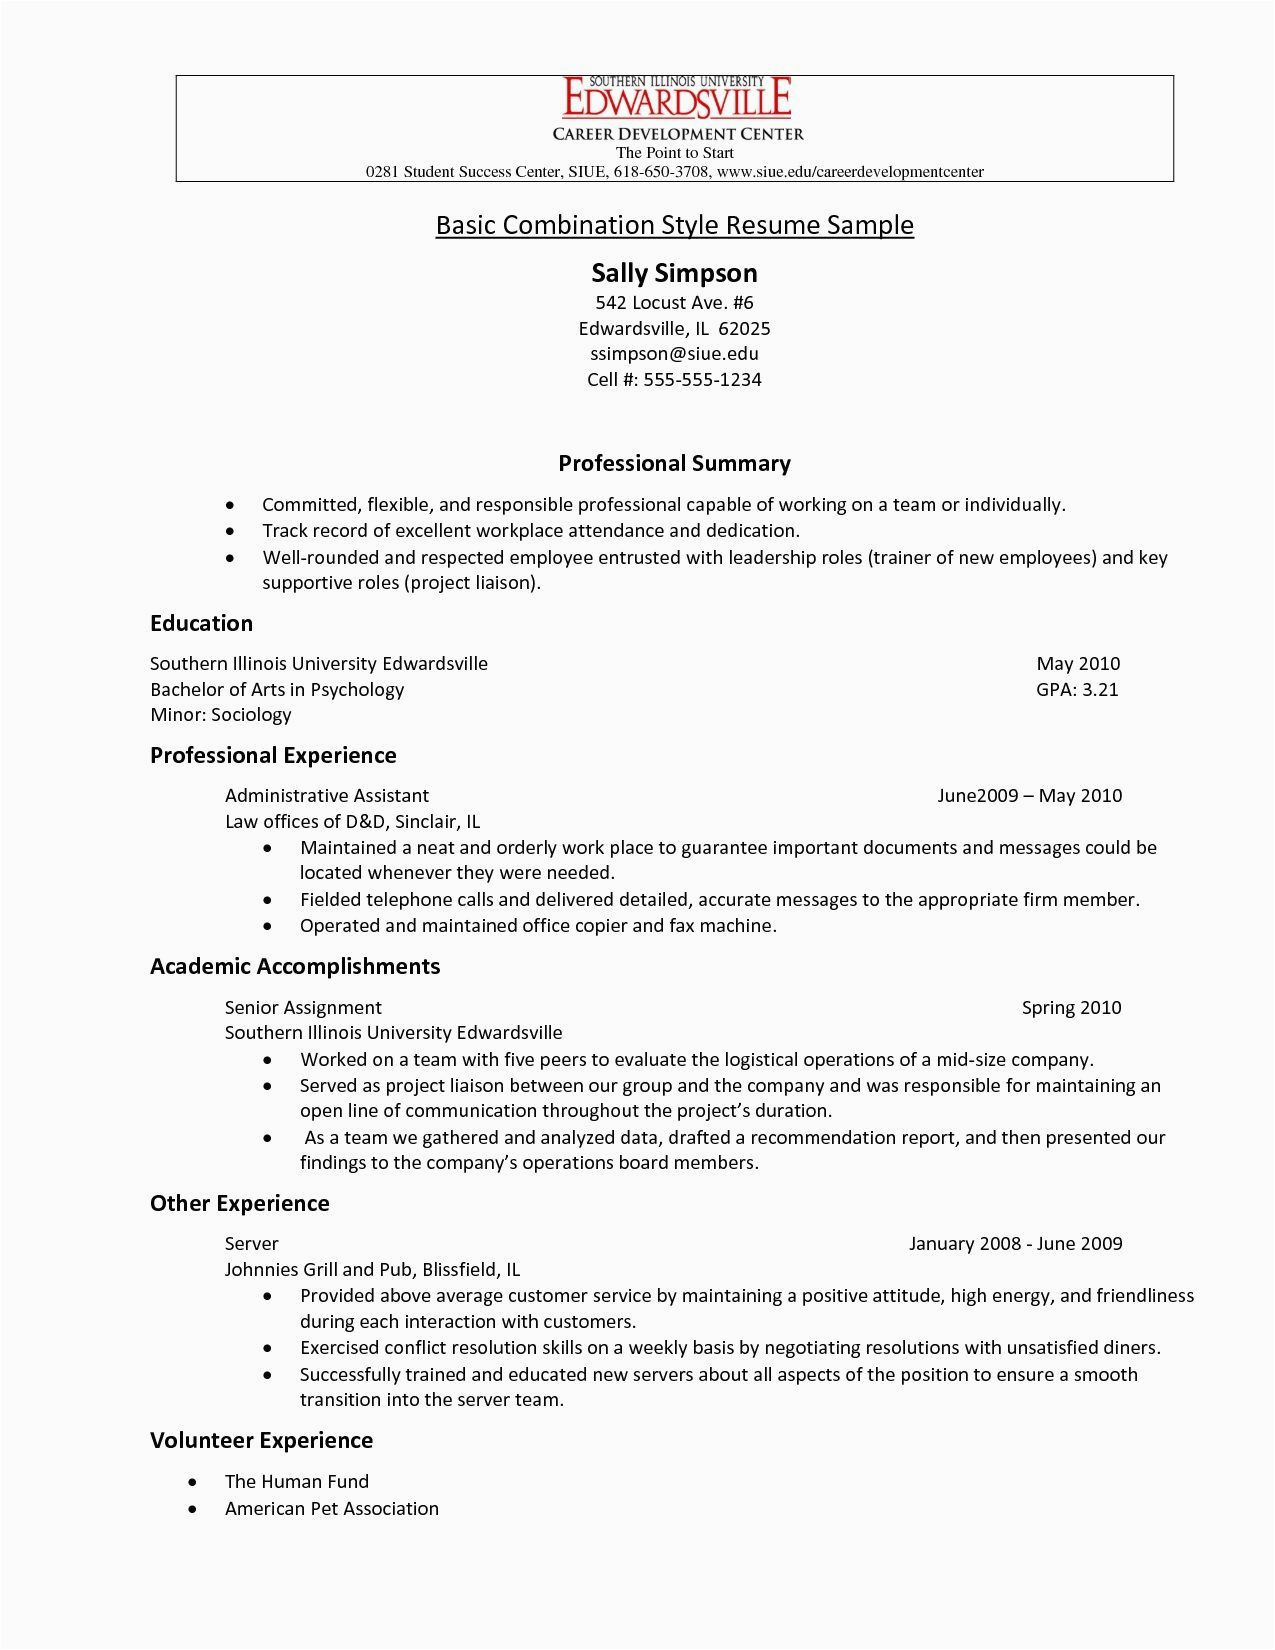 Sample Resume for Ms In Us with Work Experience U S Resume format Professional format Professional Resume